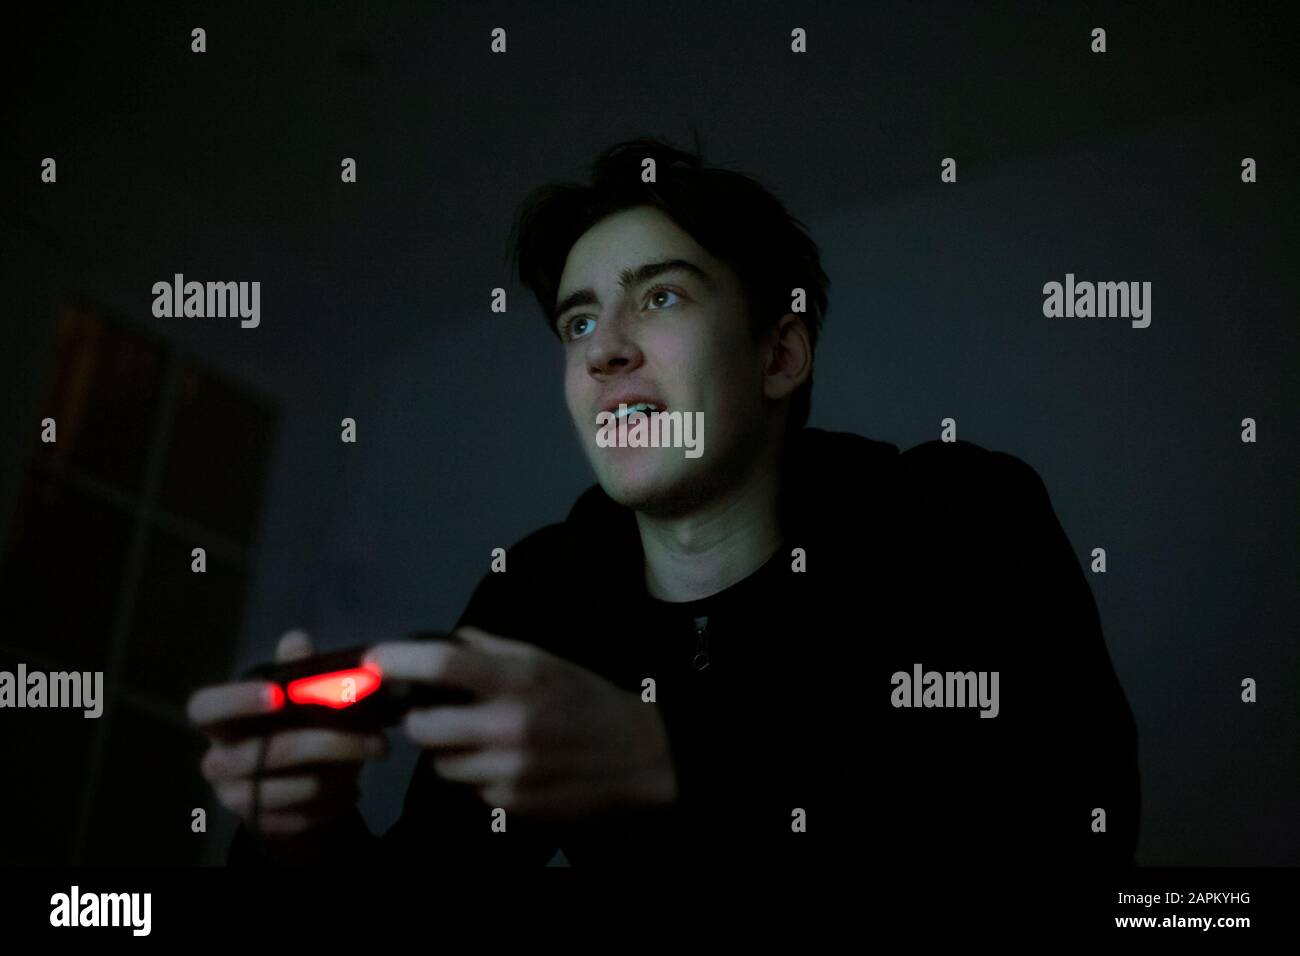 Teenage boy playing video game with console in the dark Stock Photo